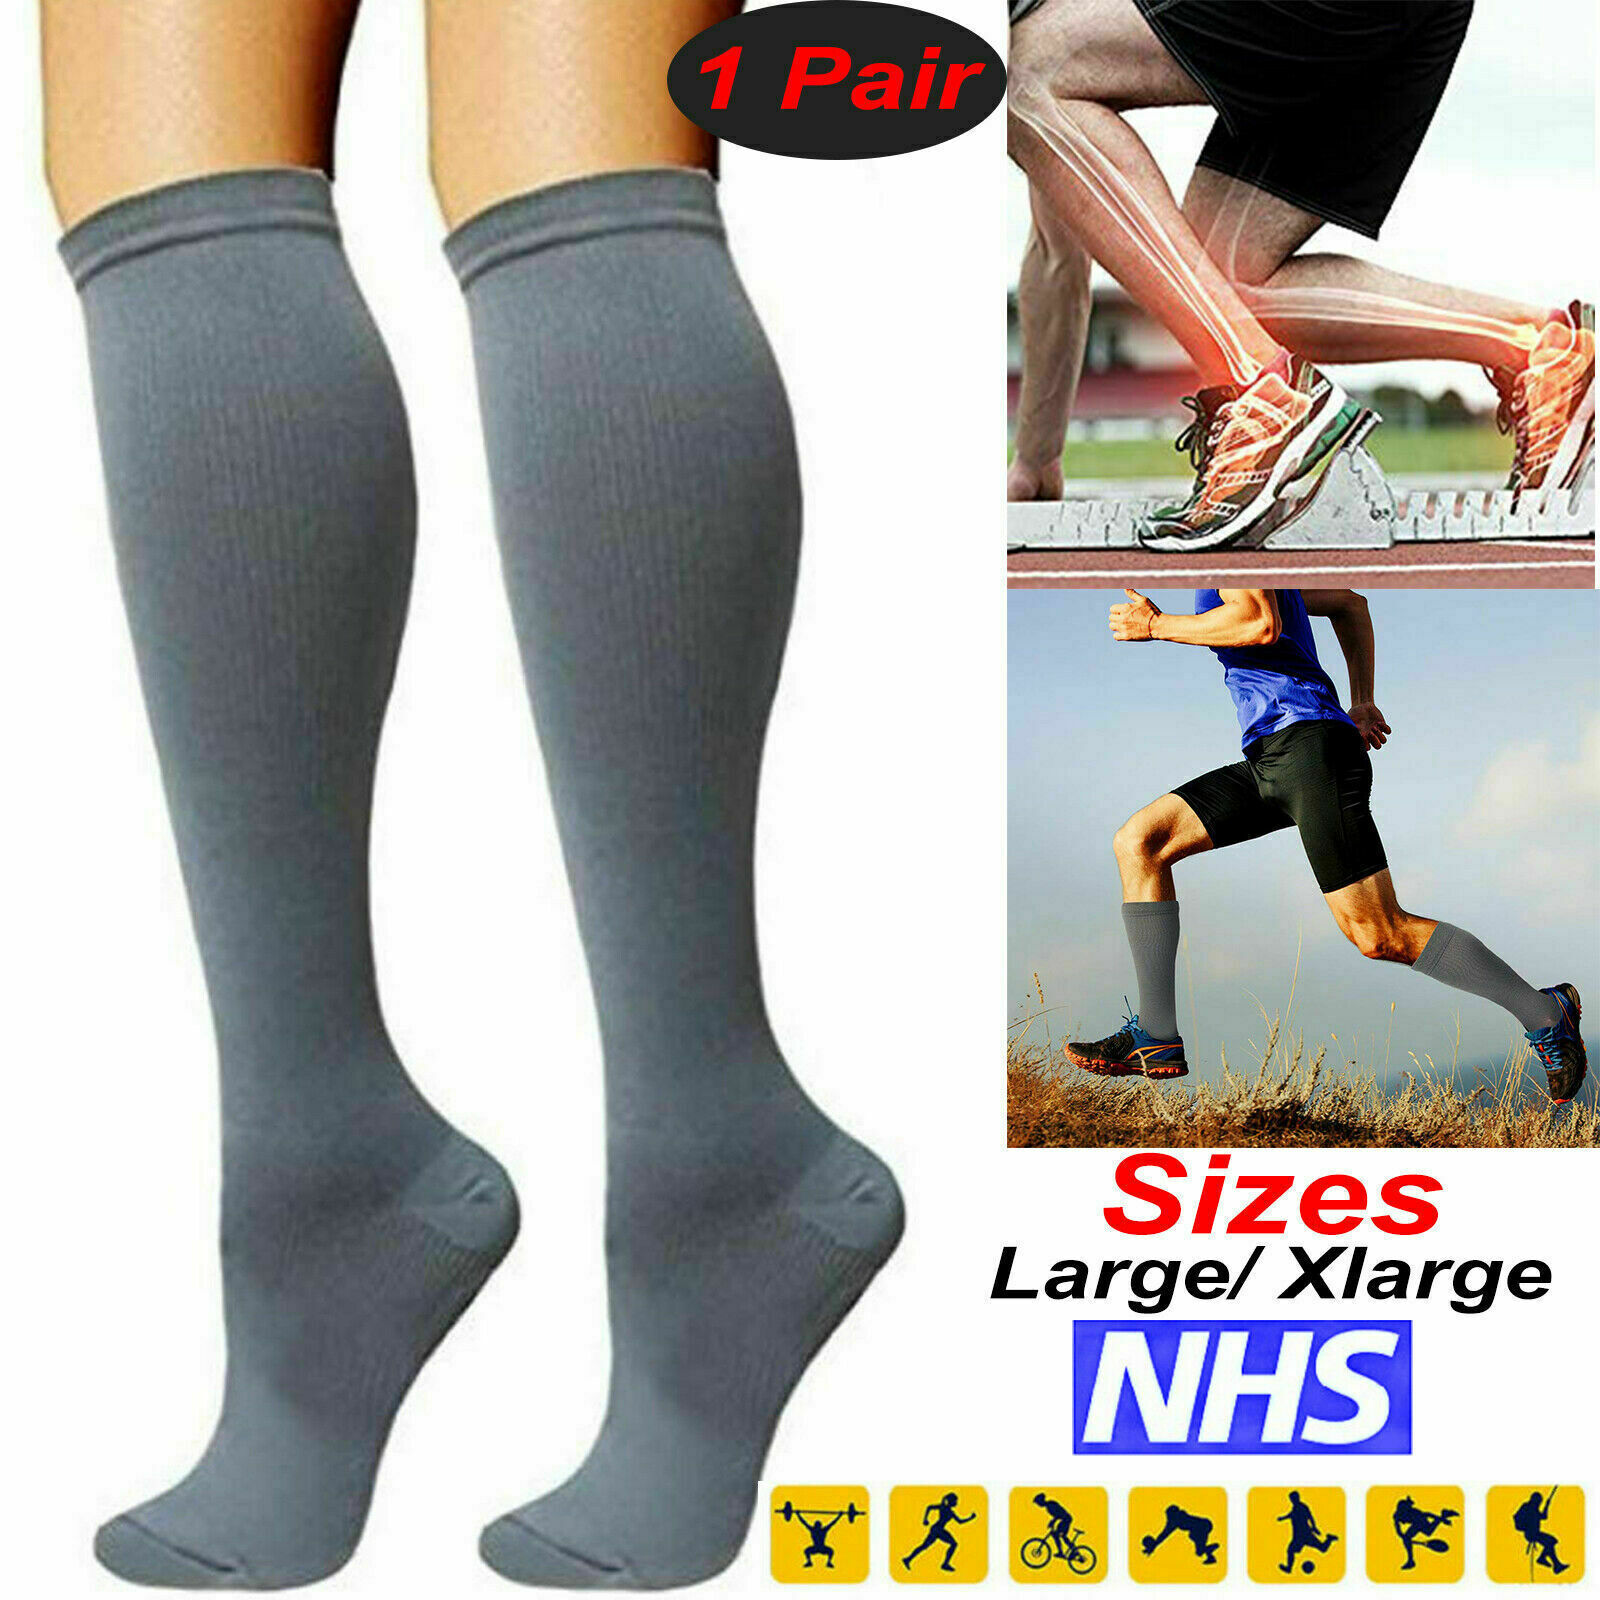 Large - Extra Large Grey Unisex Miracle Flight Travel Compression Socks Anti Swelling Fatigue DVT Support